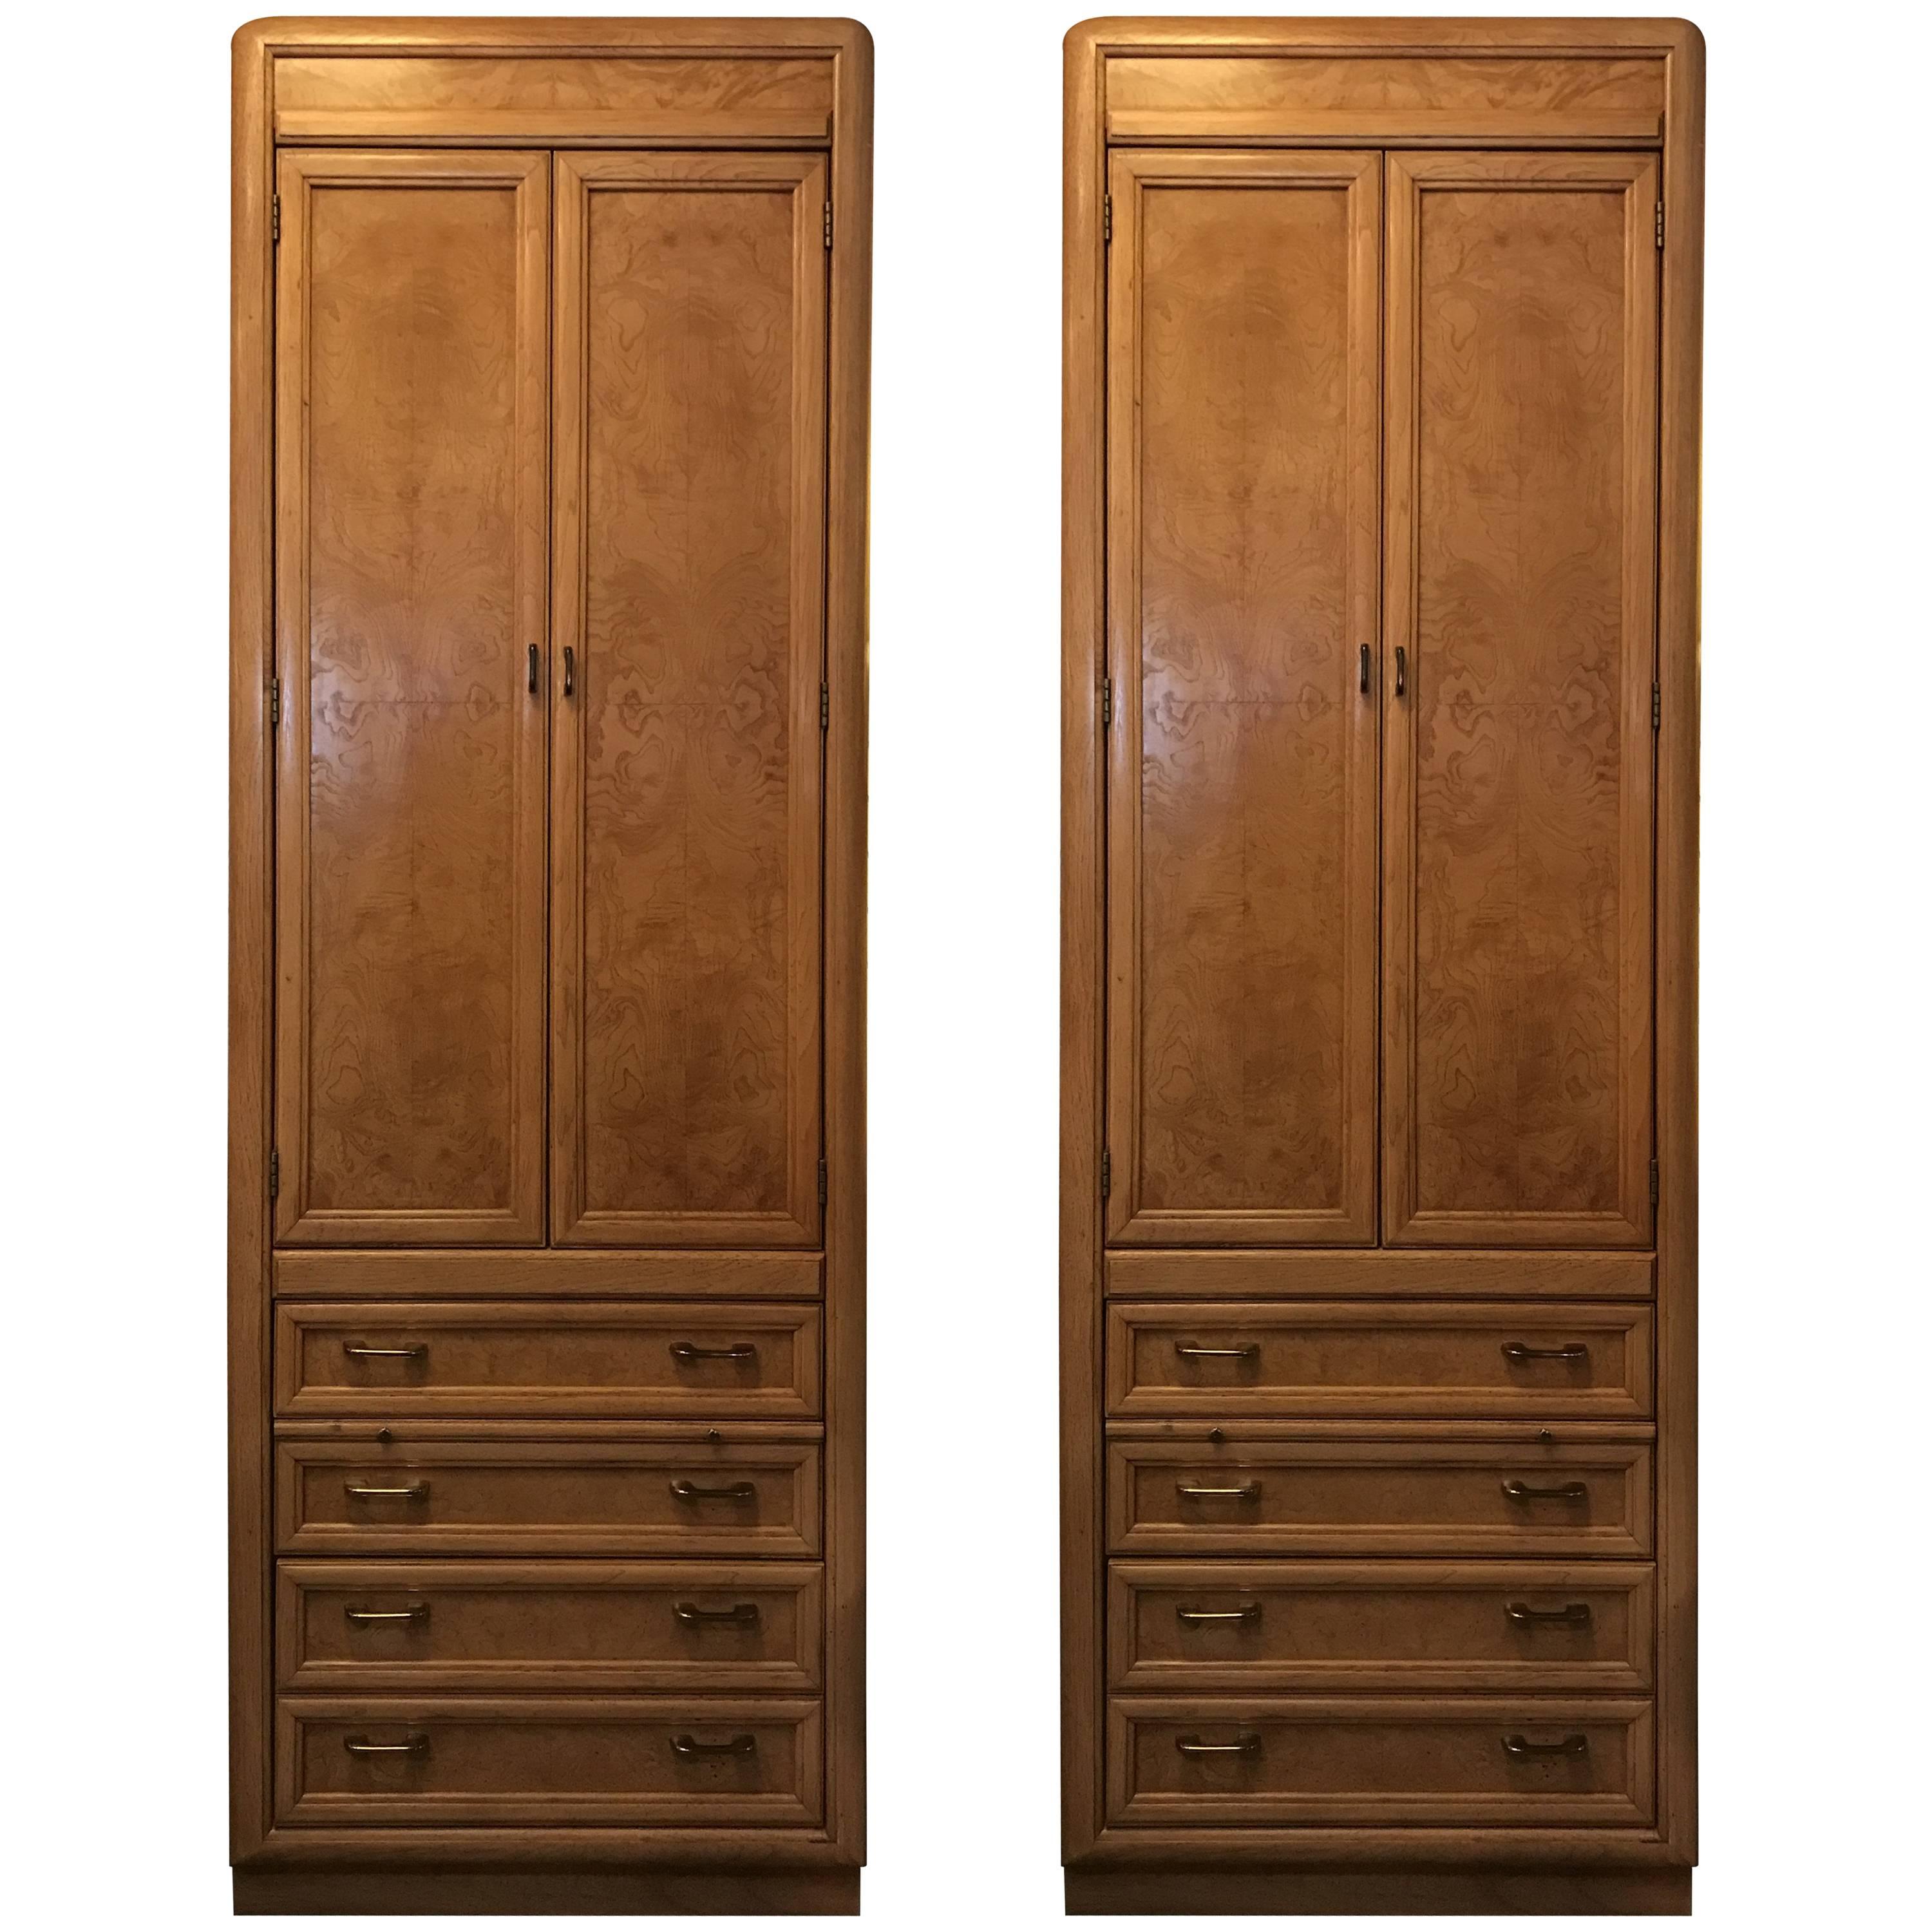 Rare Pair of High and Narrow Bird's-Eye Maple Cabinets by Thomasville